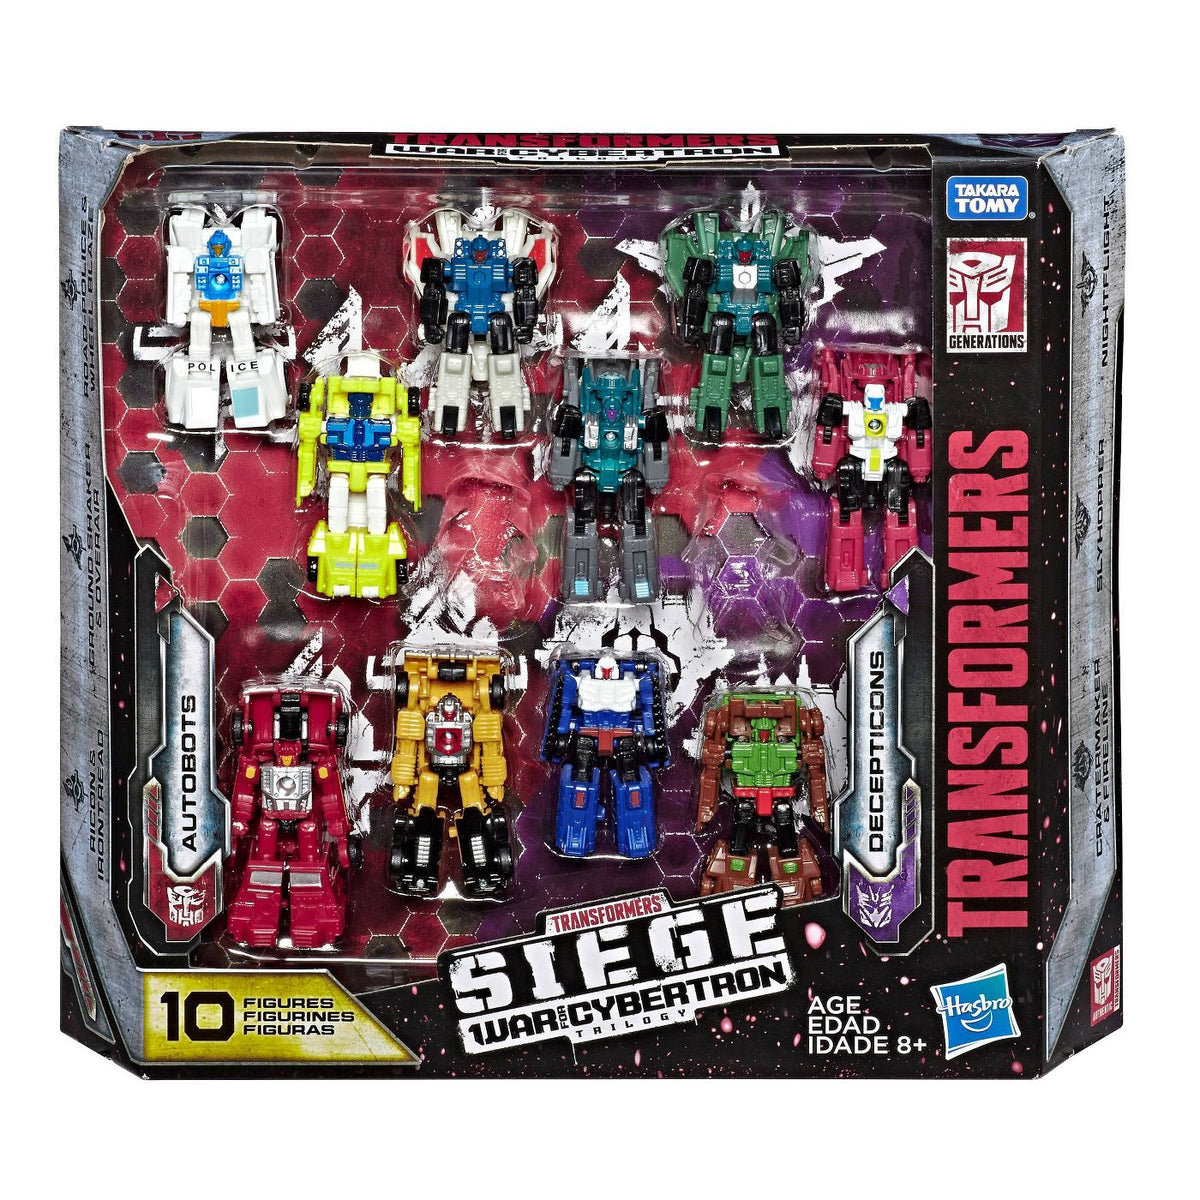 Transformers Siege Micromaster Autobots vs Decepticons 10pack giftset